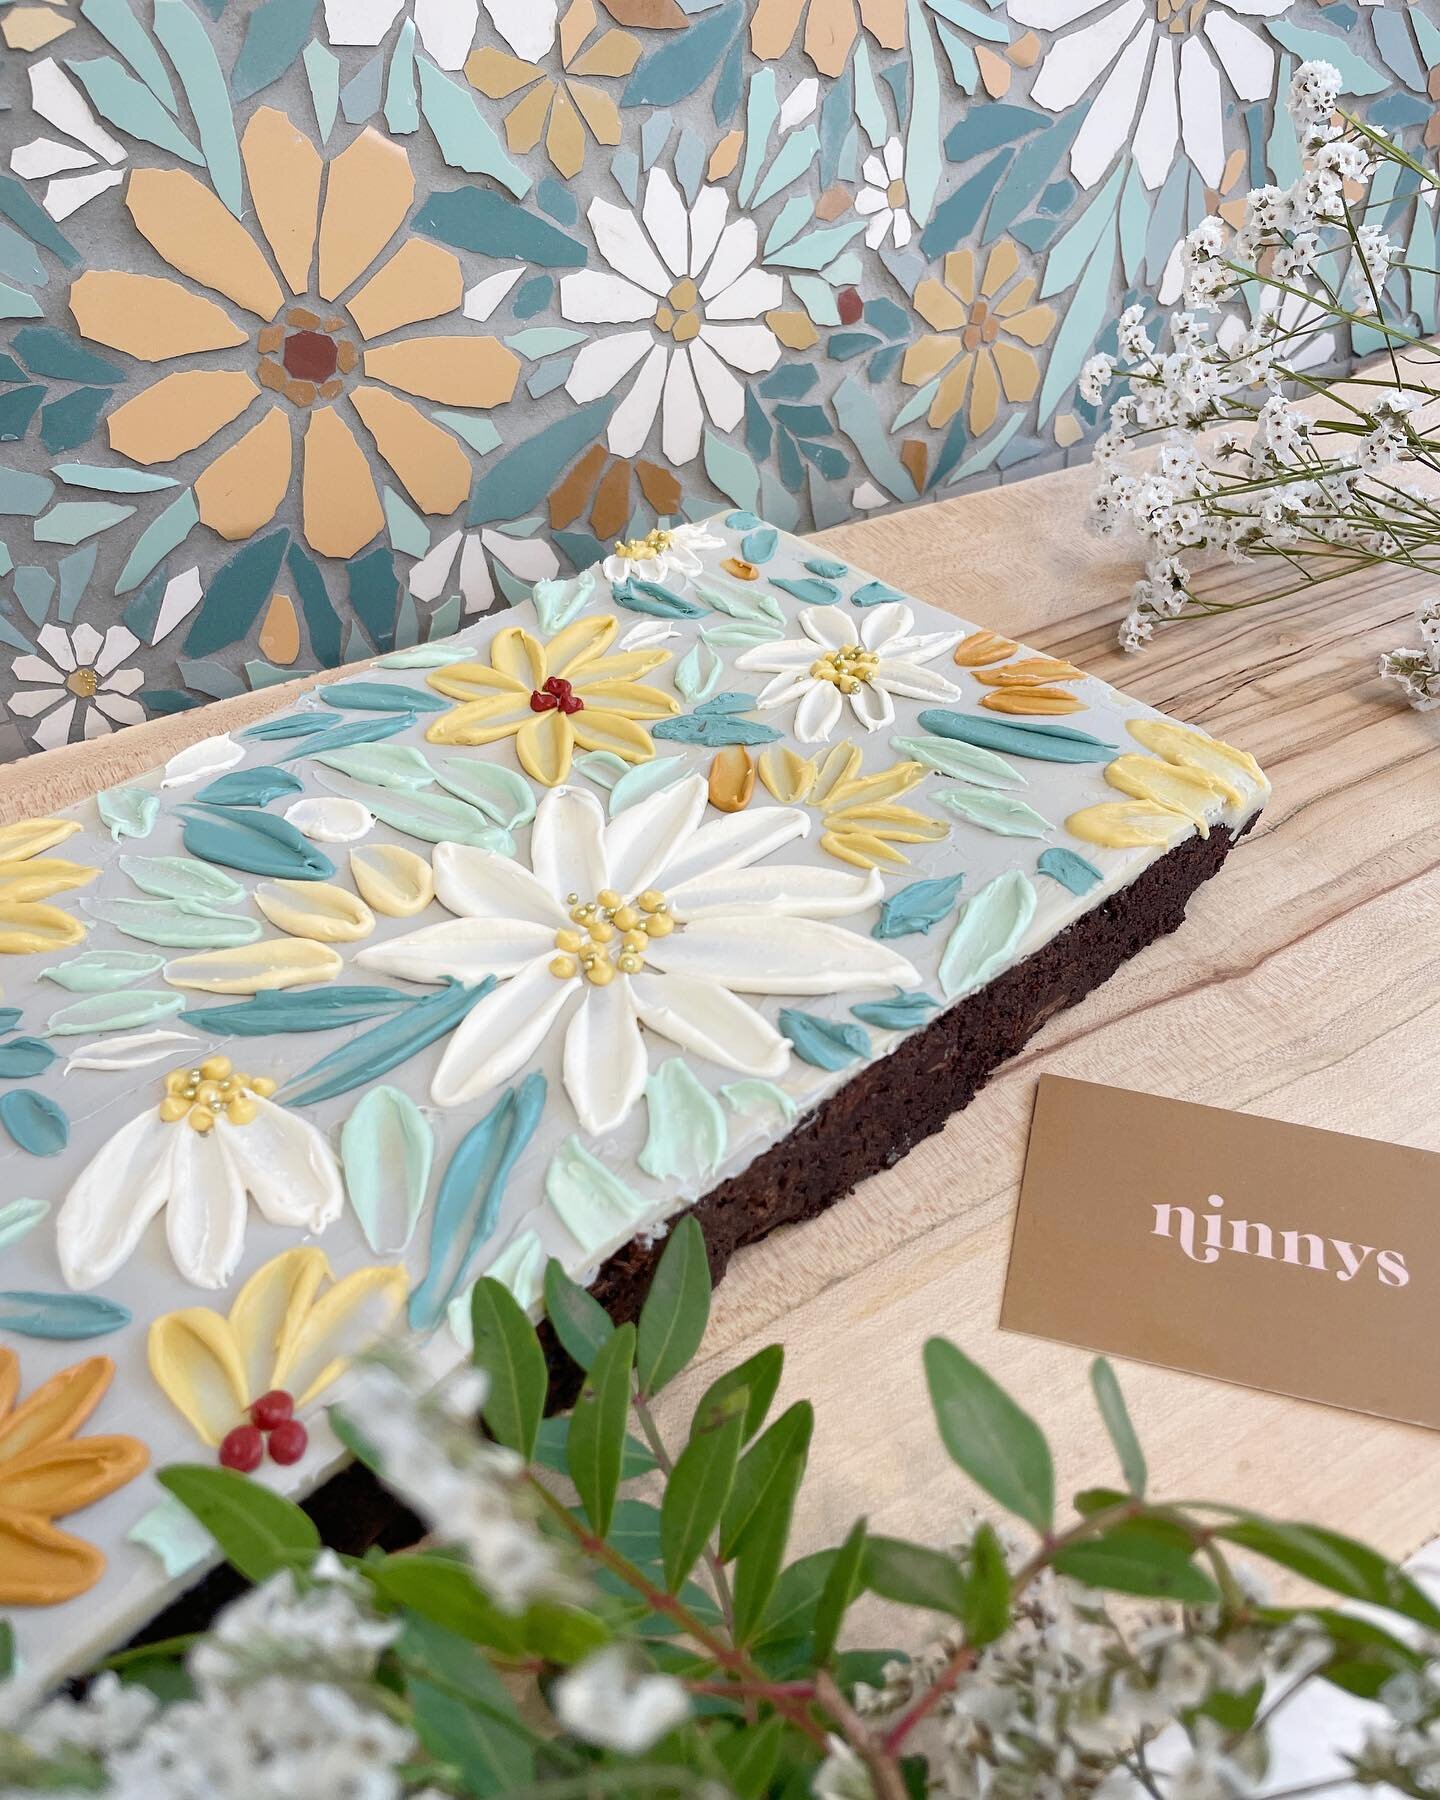 Are these the most beautiful brownies you have ever seen?!?!? 🍃🌼

@ninnysbakes recreated my mosaic designs&hellip; ON A BROWNIE!!!! 
Thankyou so so much ladies, I feel so lucky to have one of these masterpieces💛

And you could have one of them too